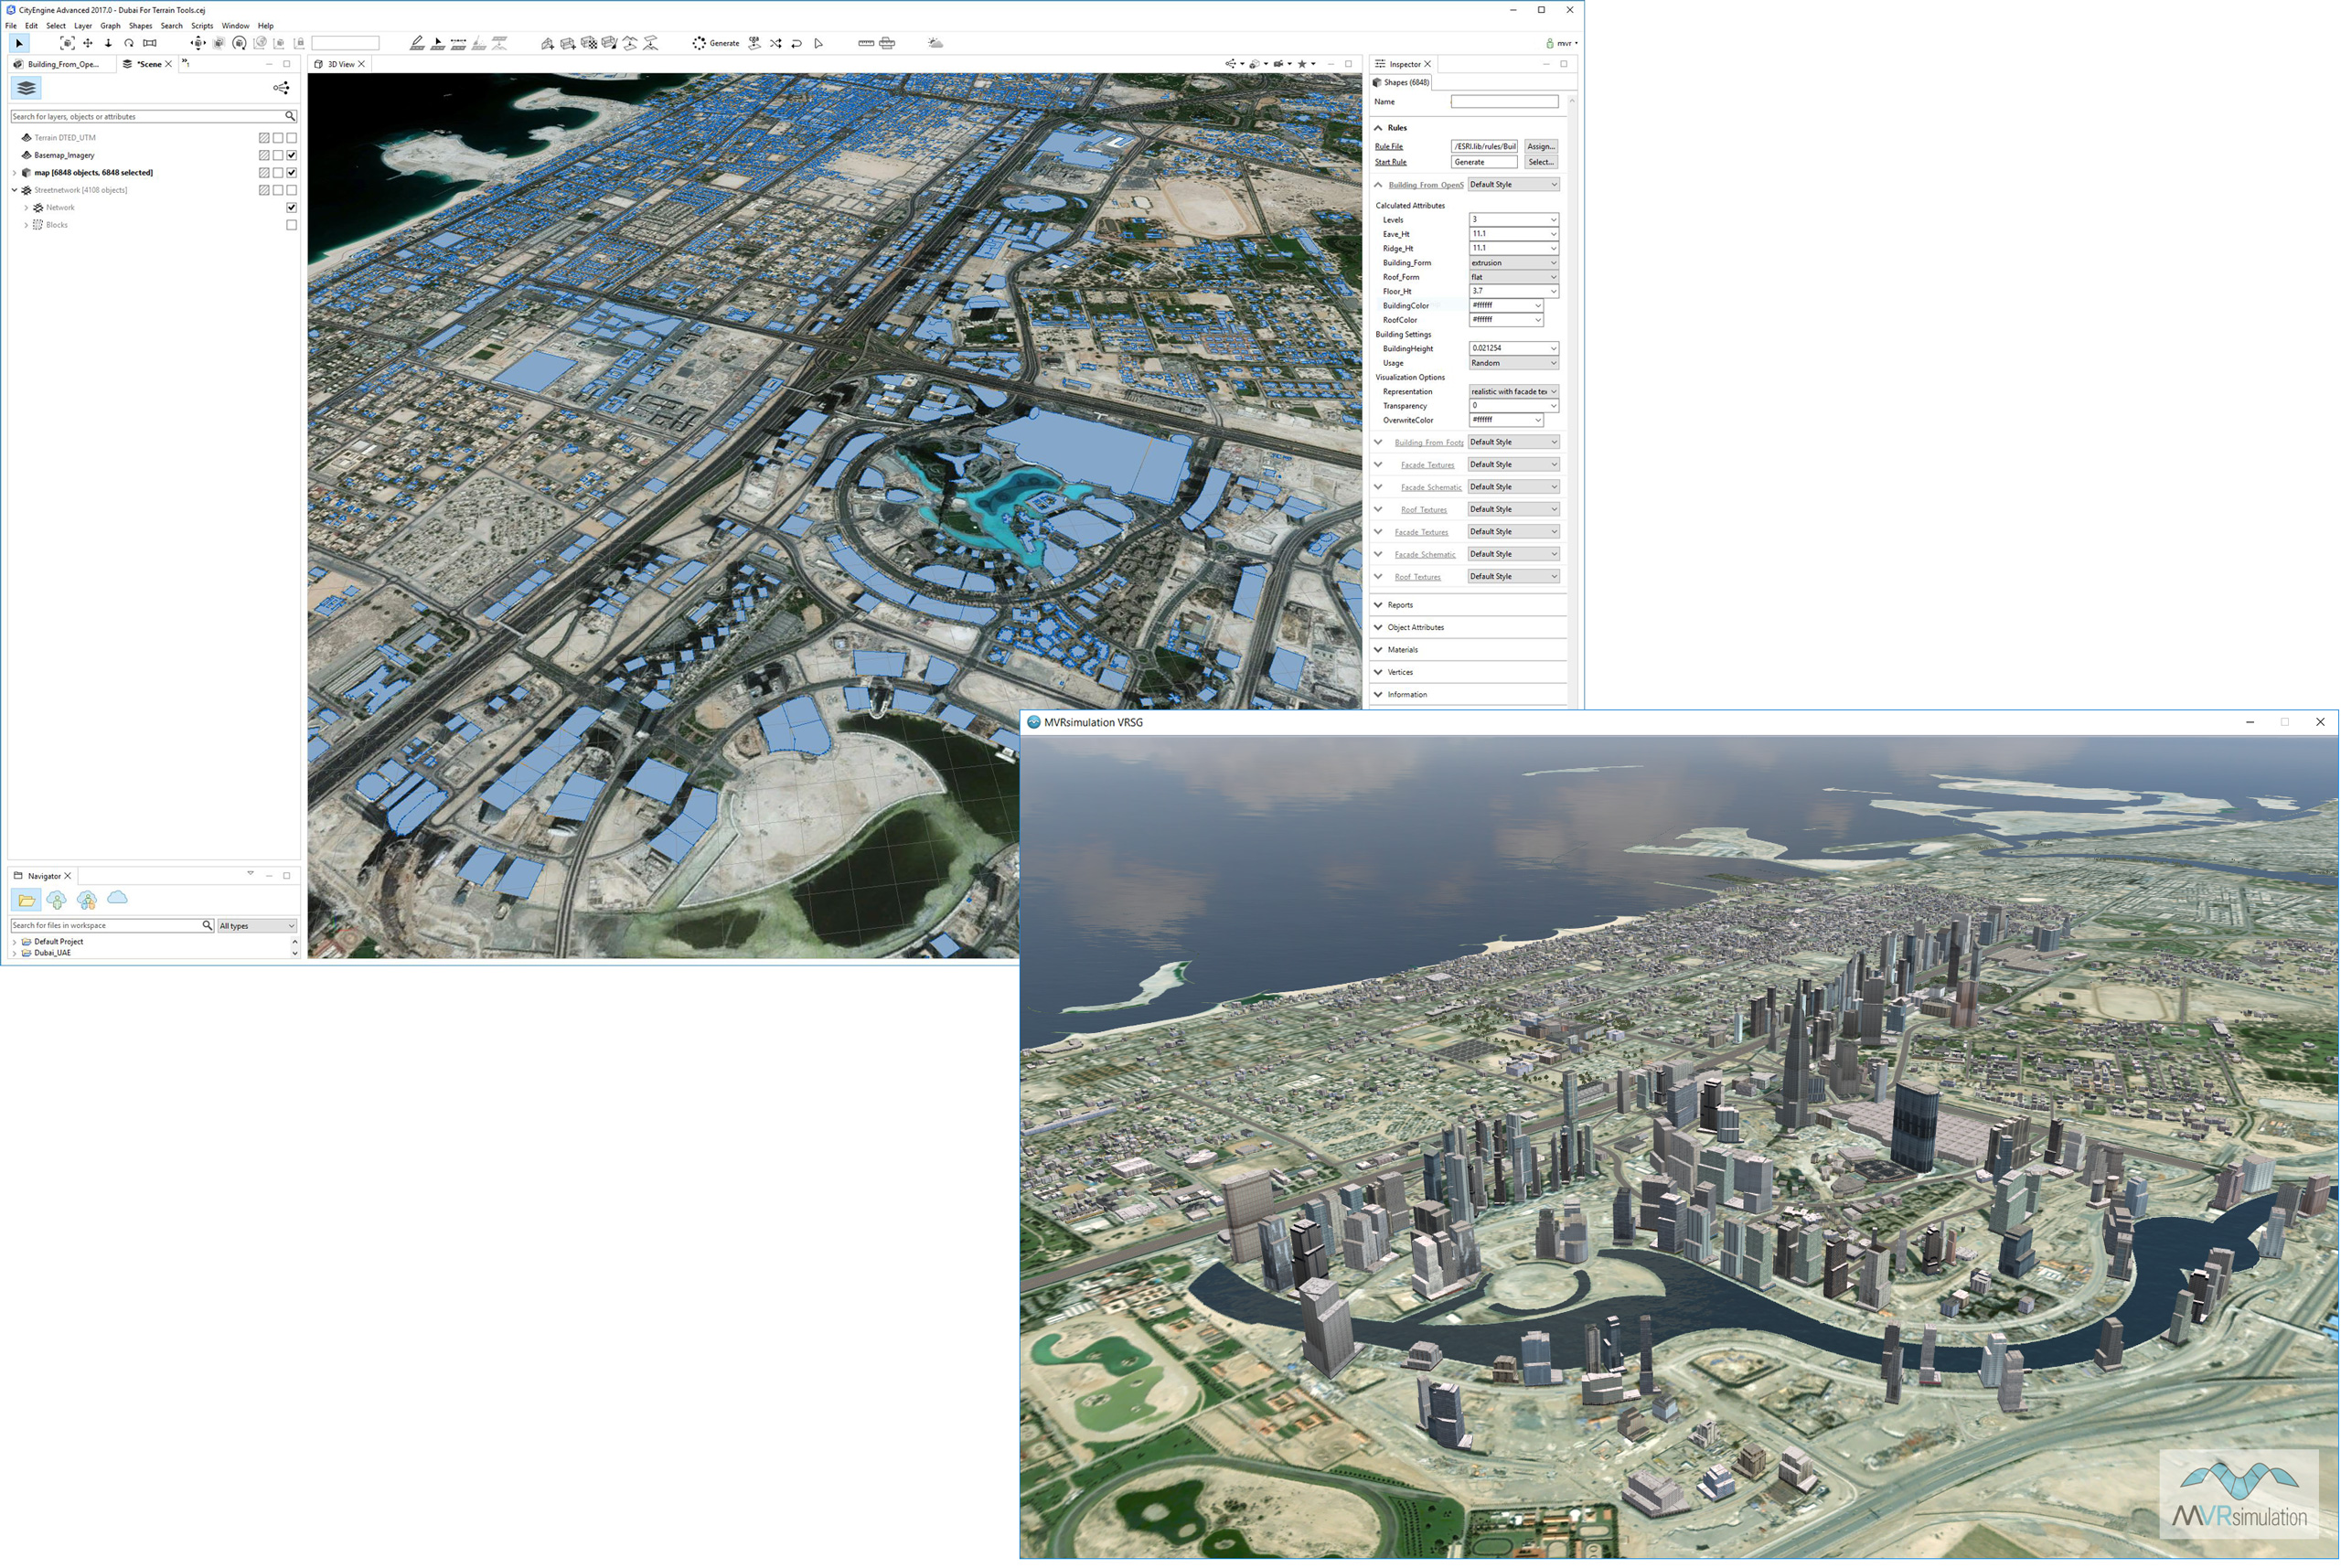 MVRsimulation's high-resolution (60 cm) city of Dubai in Esri CityEngine prior to exporting over 6,000 realistic 3D building models, in FBX format for conversion to MVRsimulation's model format, and resulting city rendered in VRSG. Terrain was built with MVRsimulation Terrain Tools for ArcGIS.